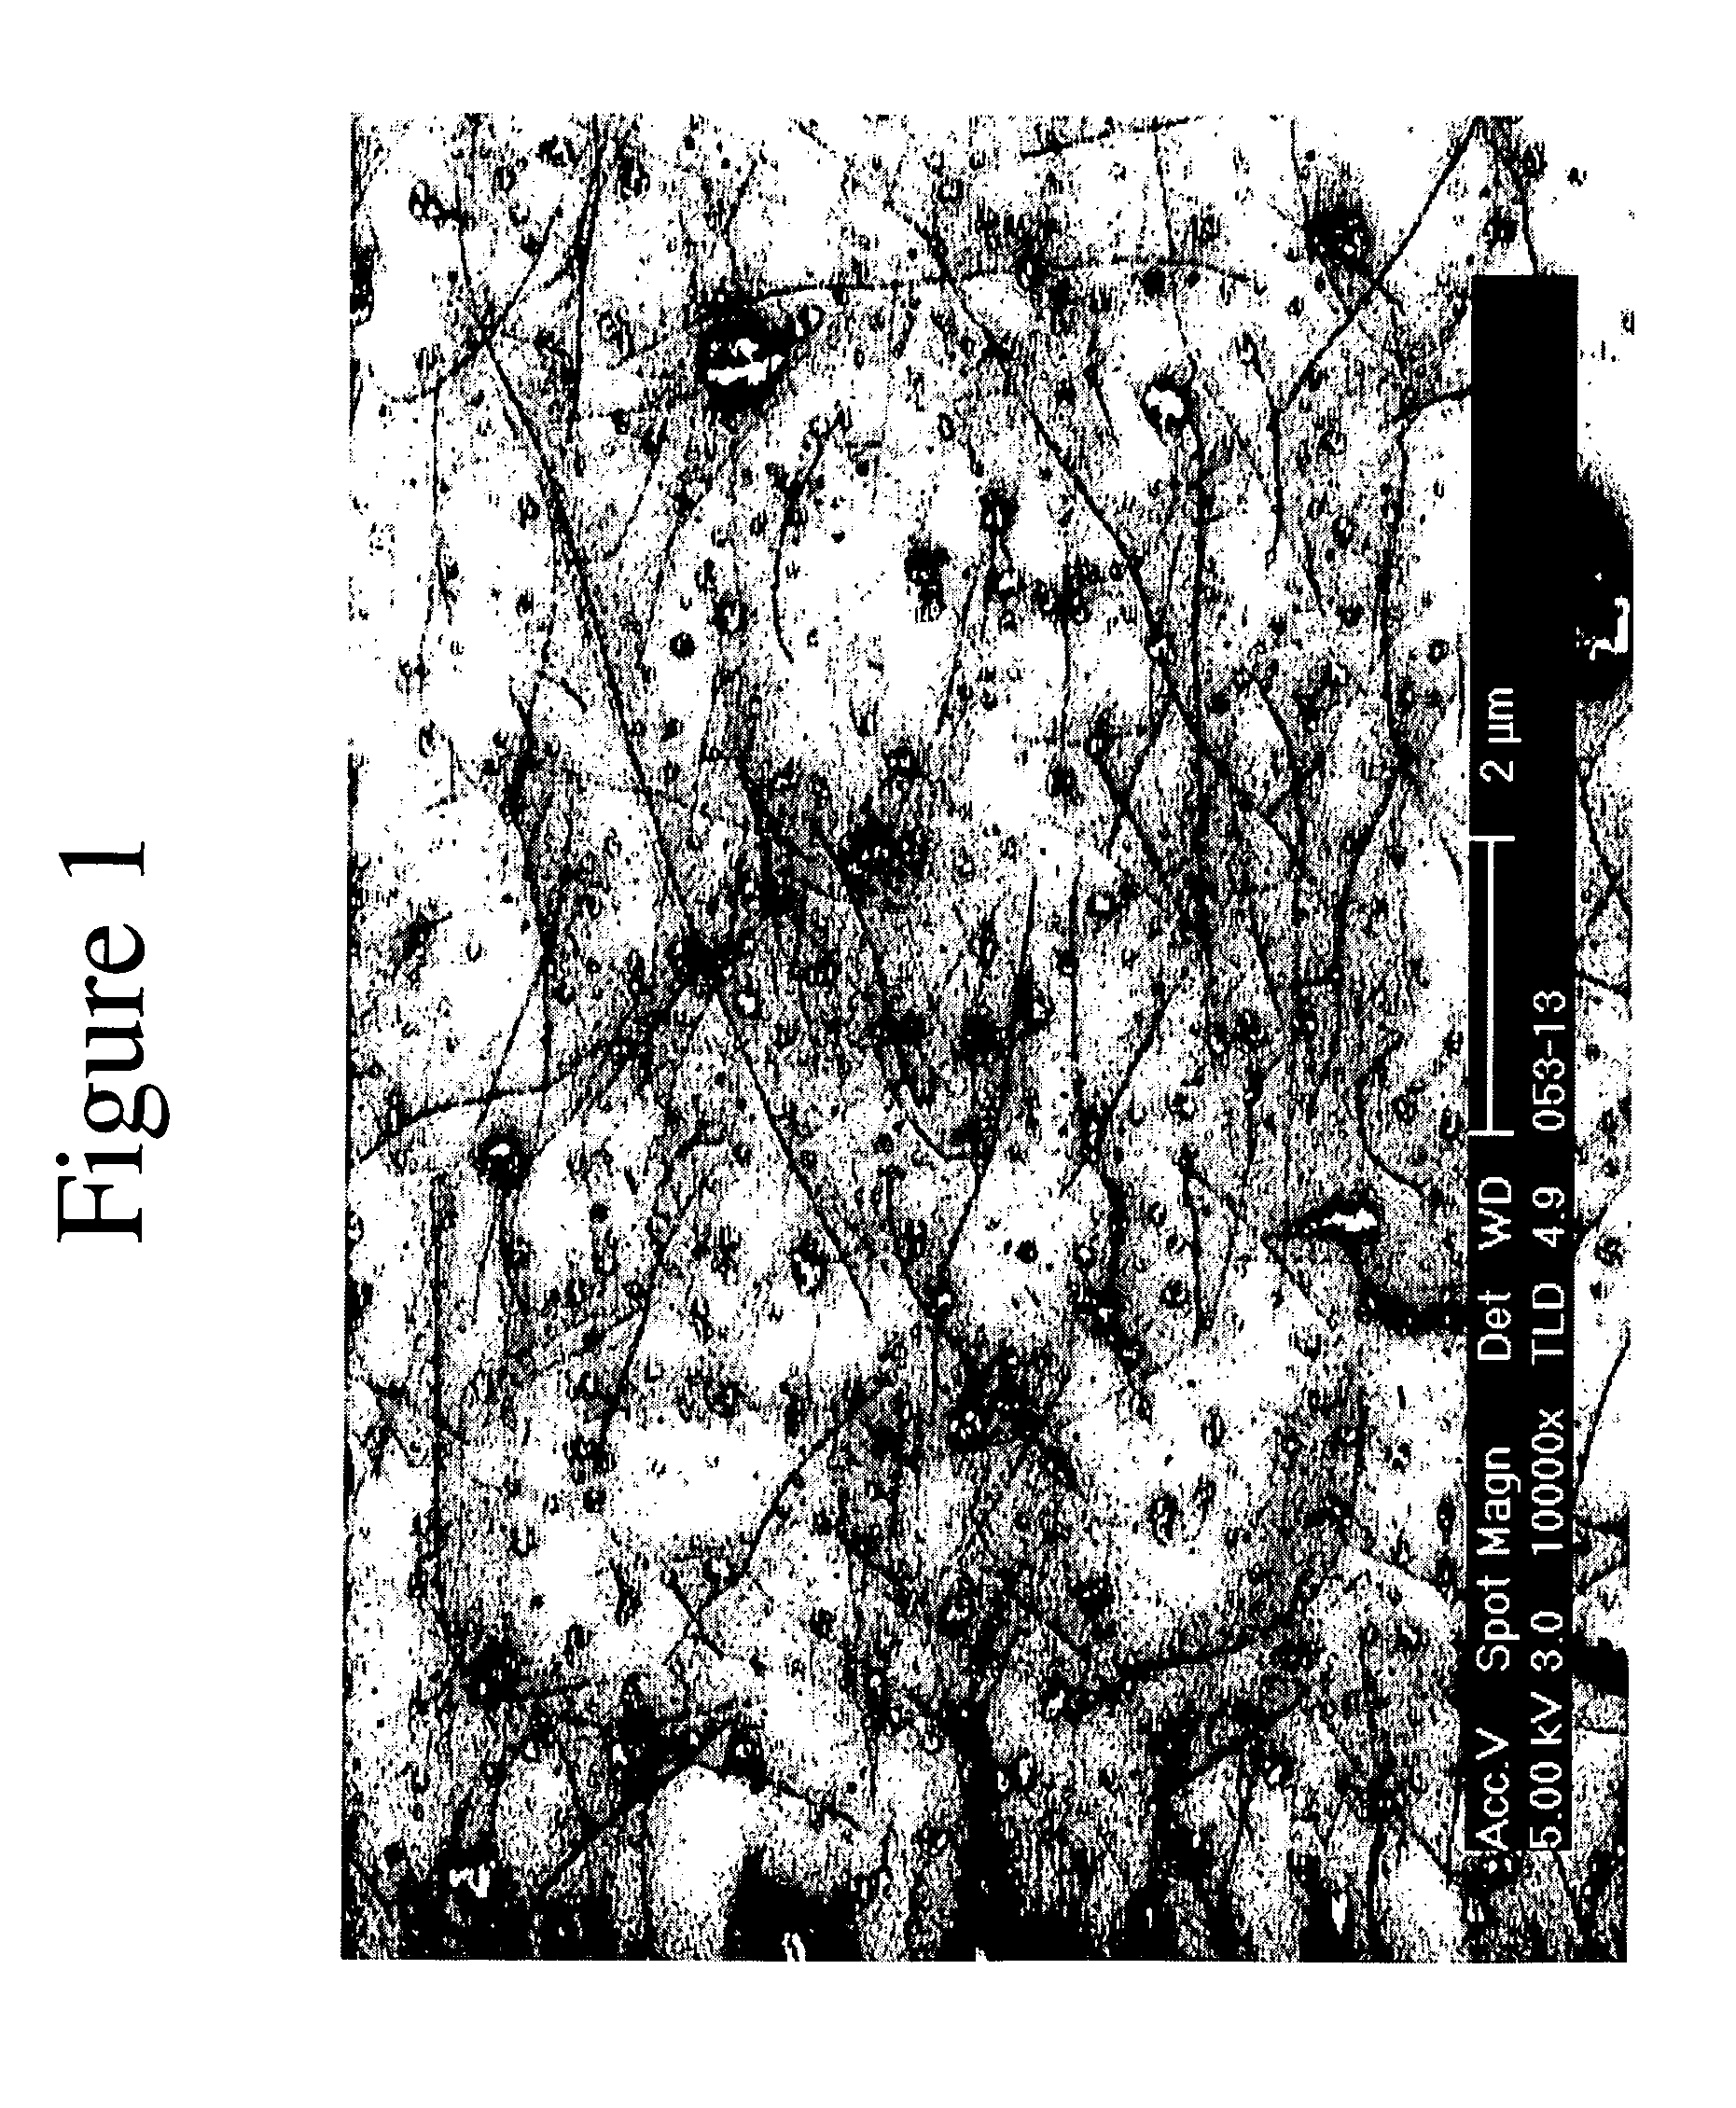 Applicator liquid for use in electronic manufacturing processes